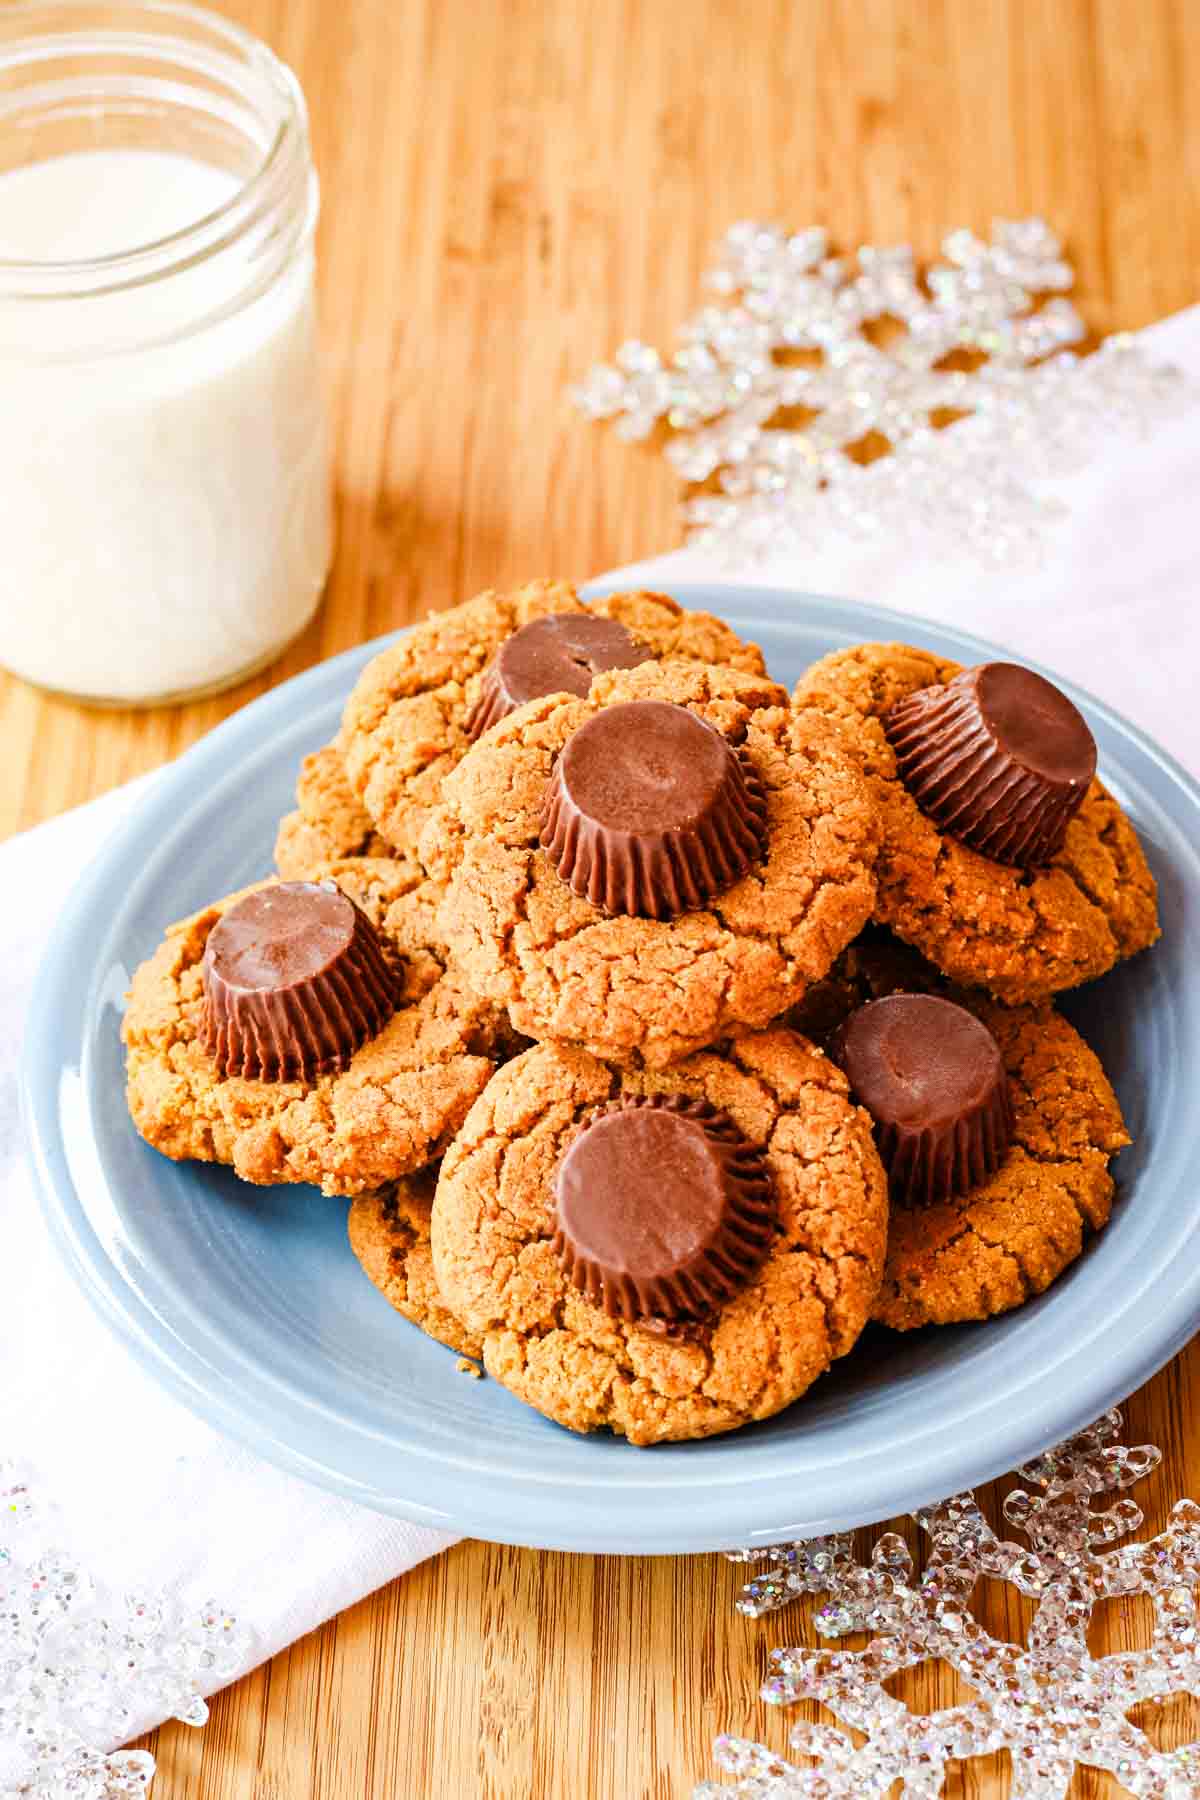 Reese's peanut butter cookies on a blue plate in top of a white napkin with a galss jar of milk.